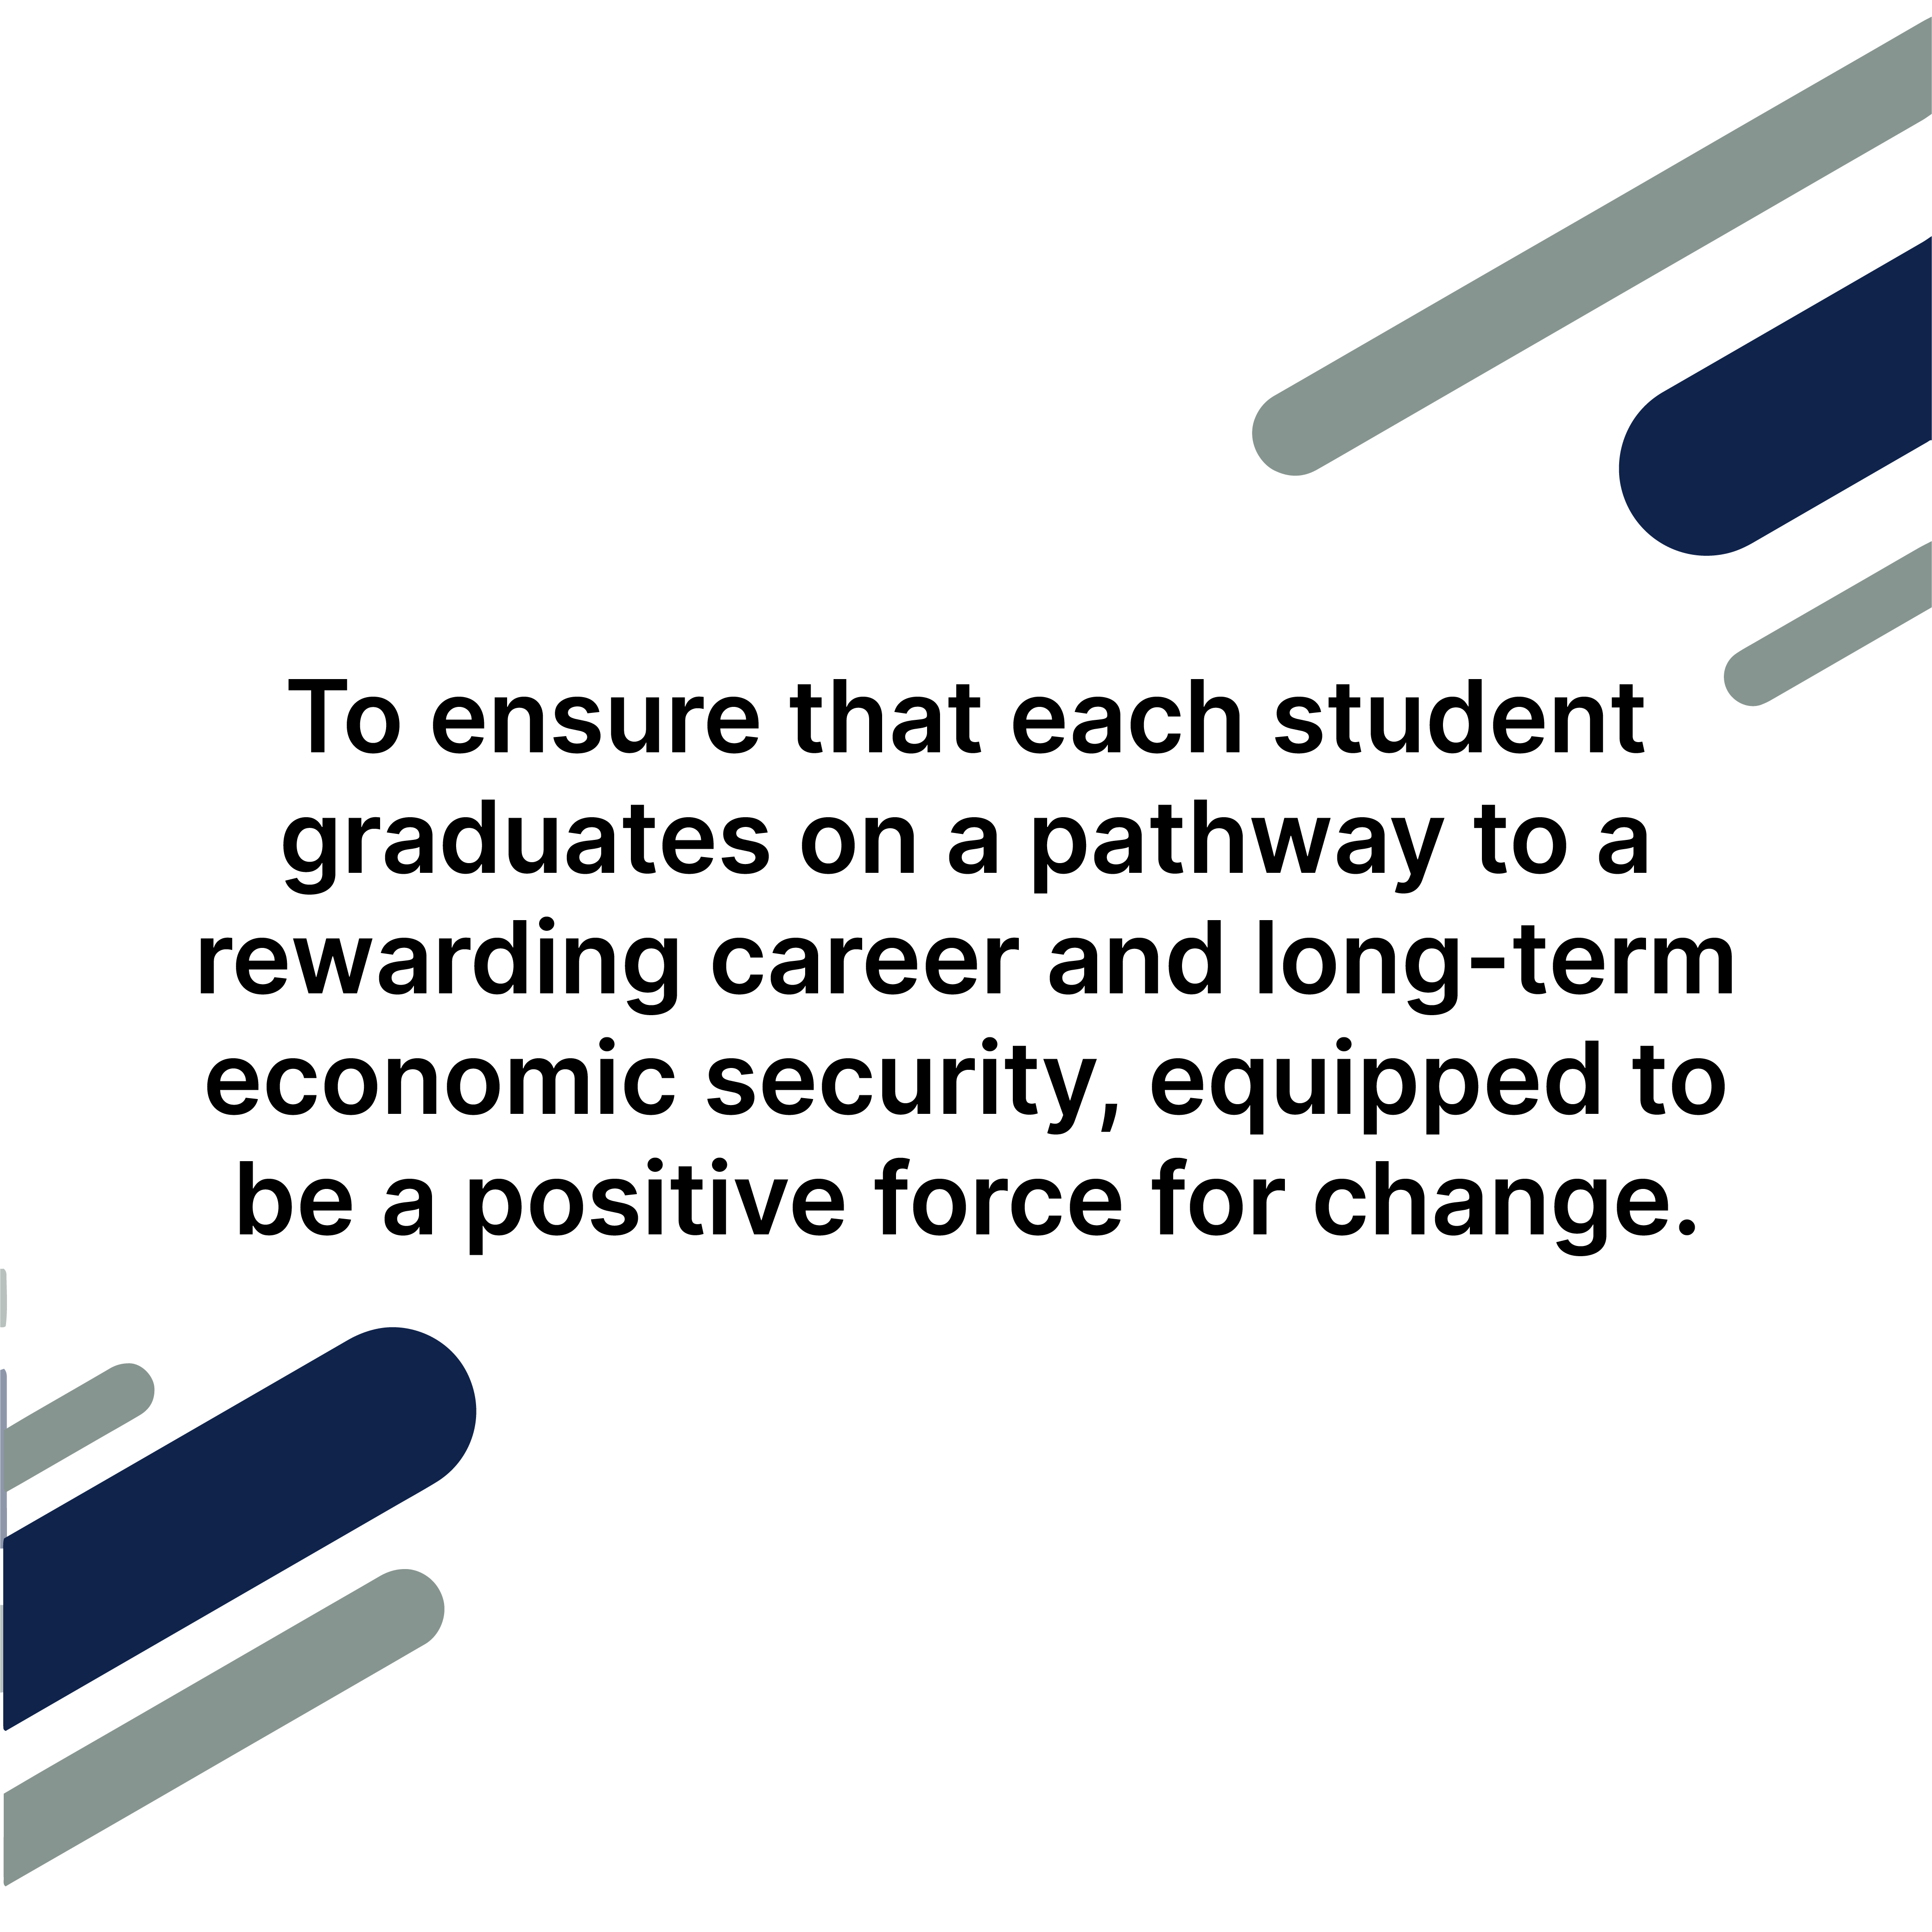 To ensure that each student graduates on a pathway to a rewarding career and long-term economic security, equipped to be a positive force for change"